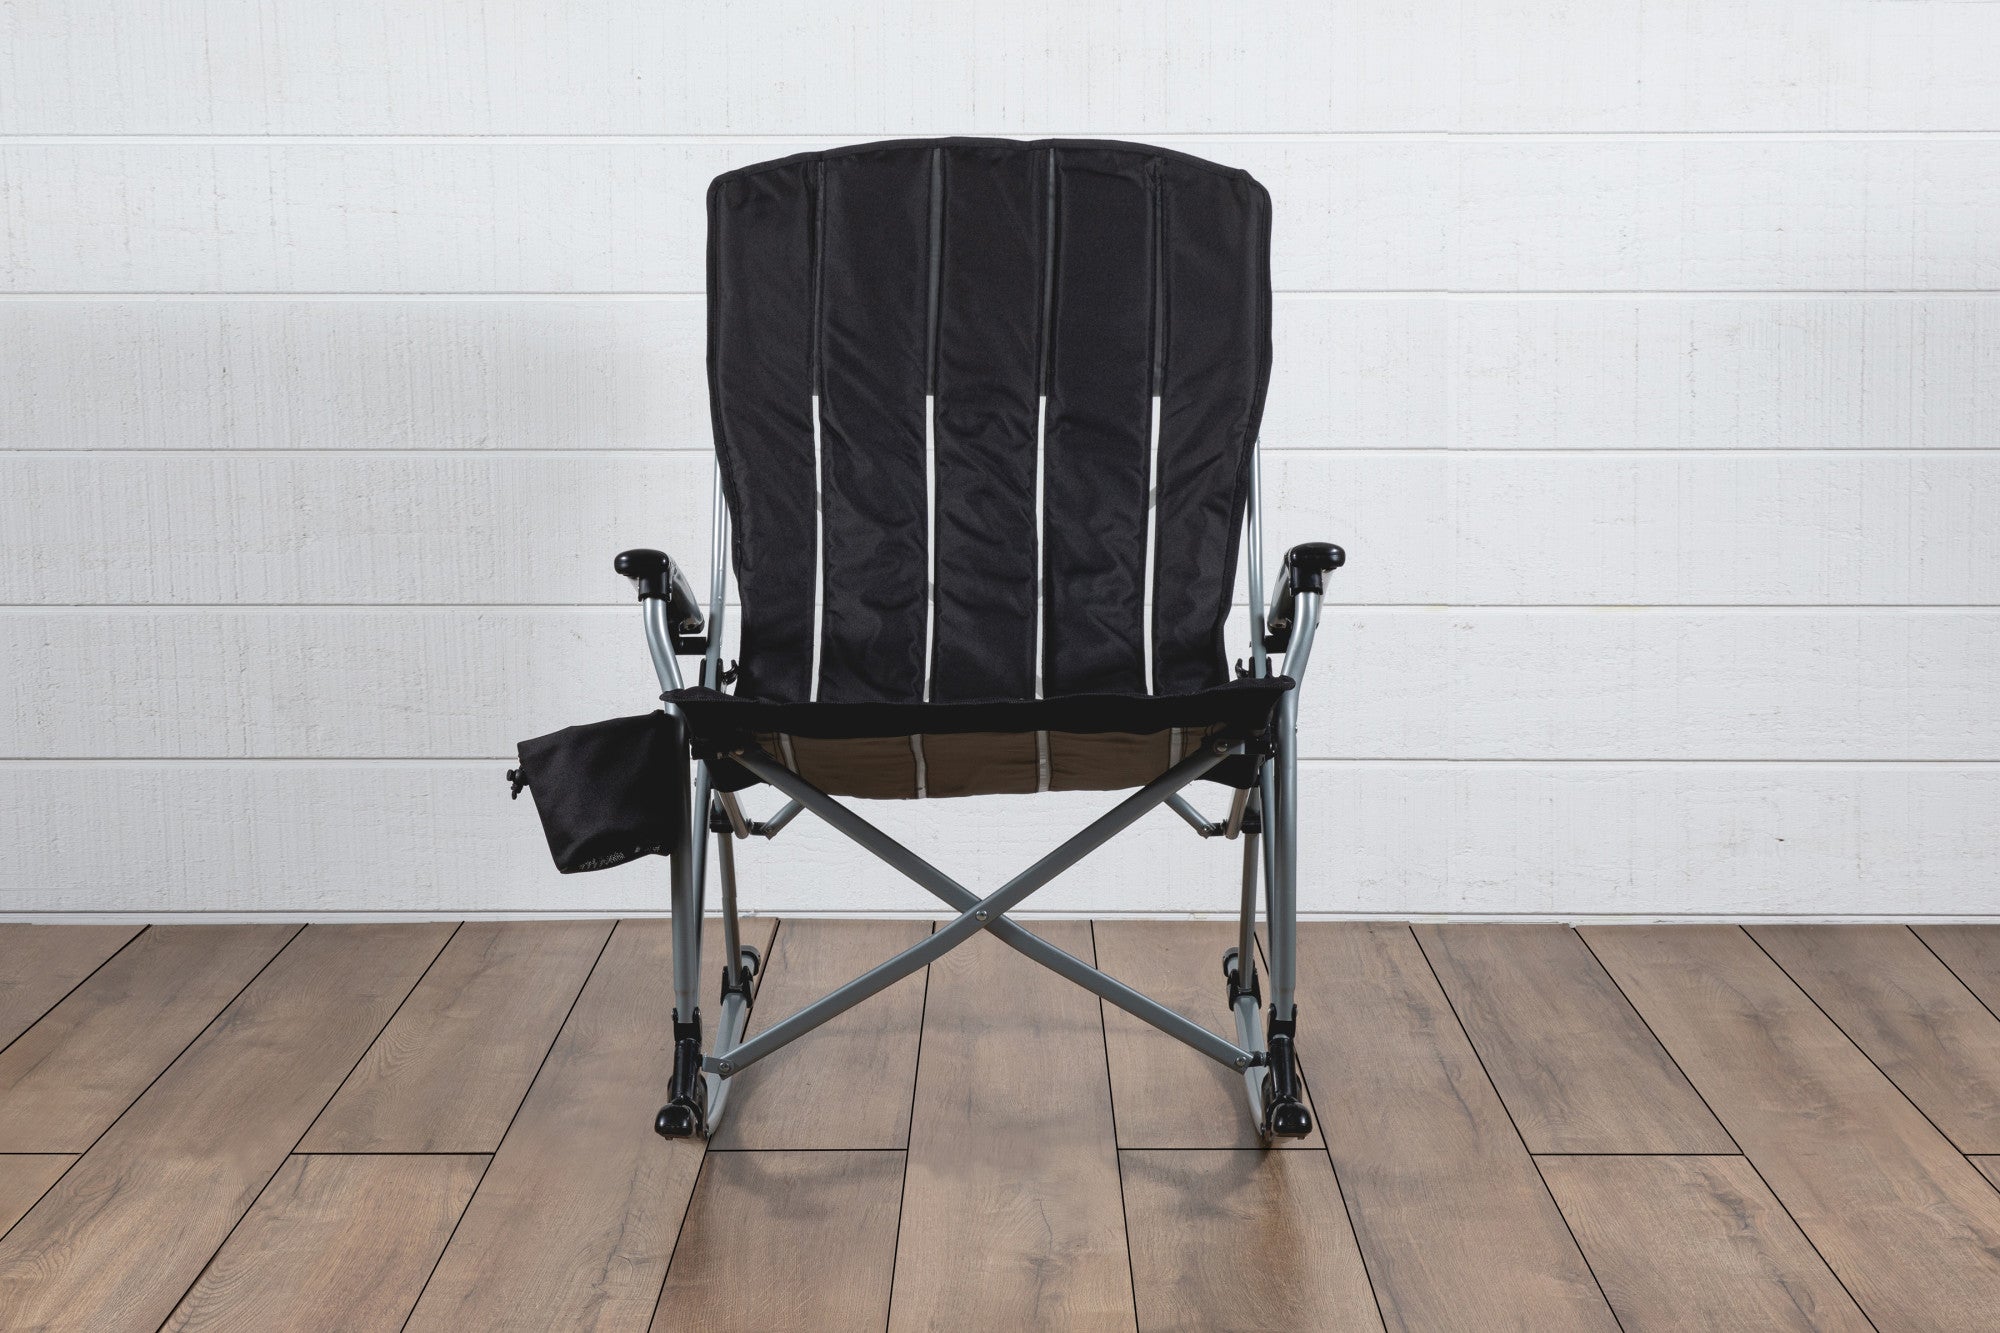 New York Yankees - Outdoor Rocking Camp Chair